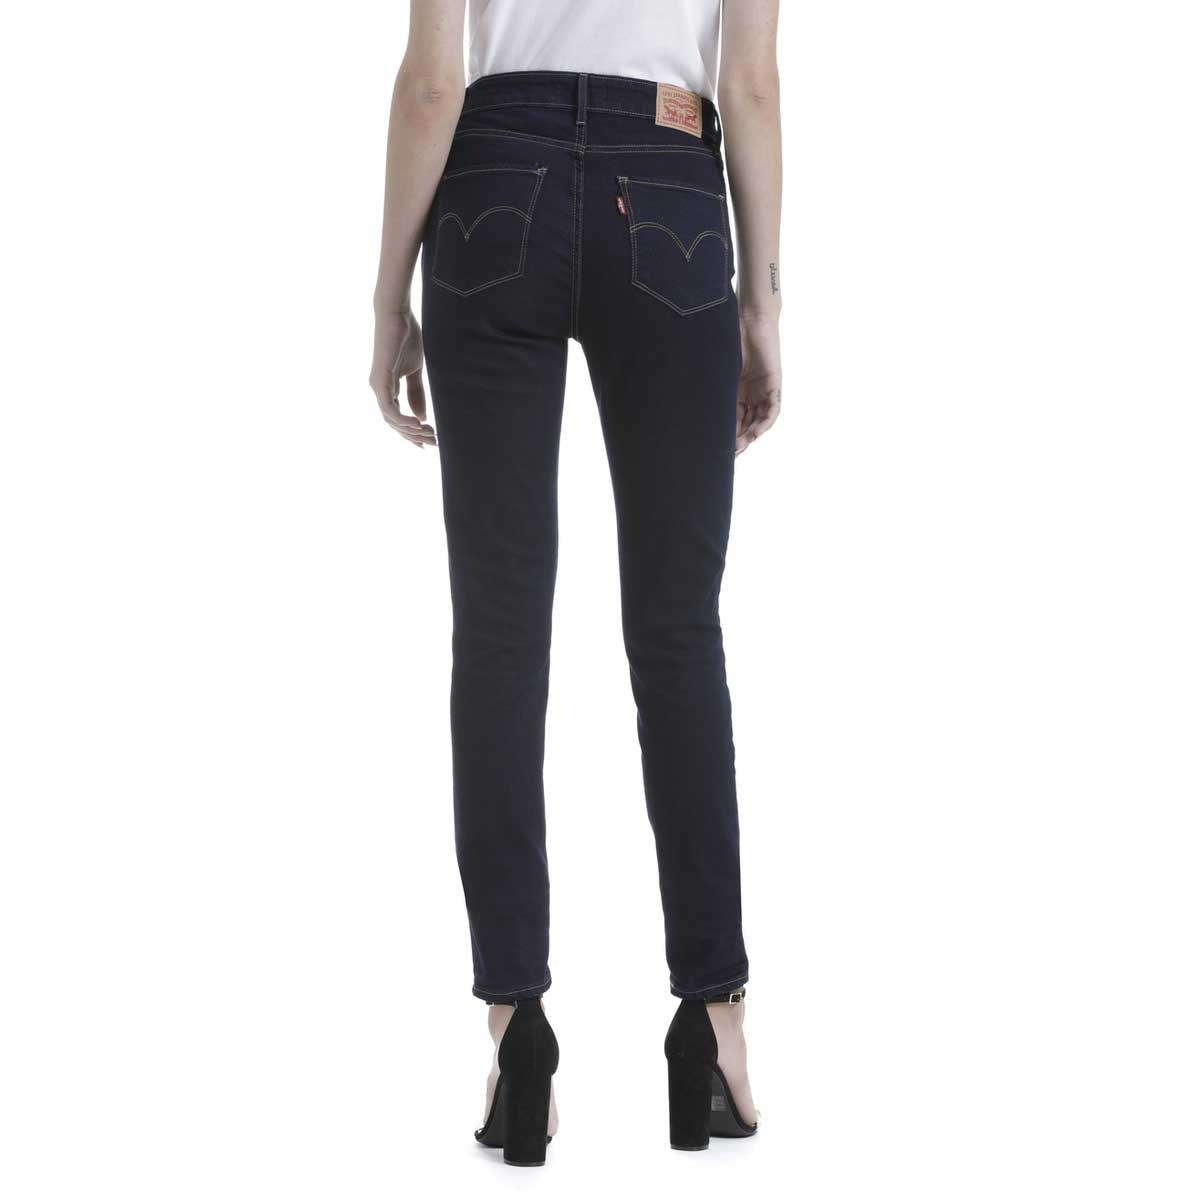 Jeans 721 High Rise Skinny Levis